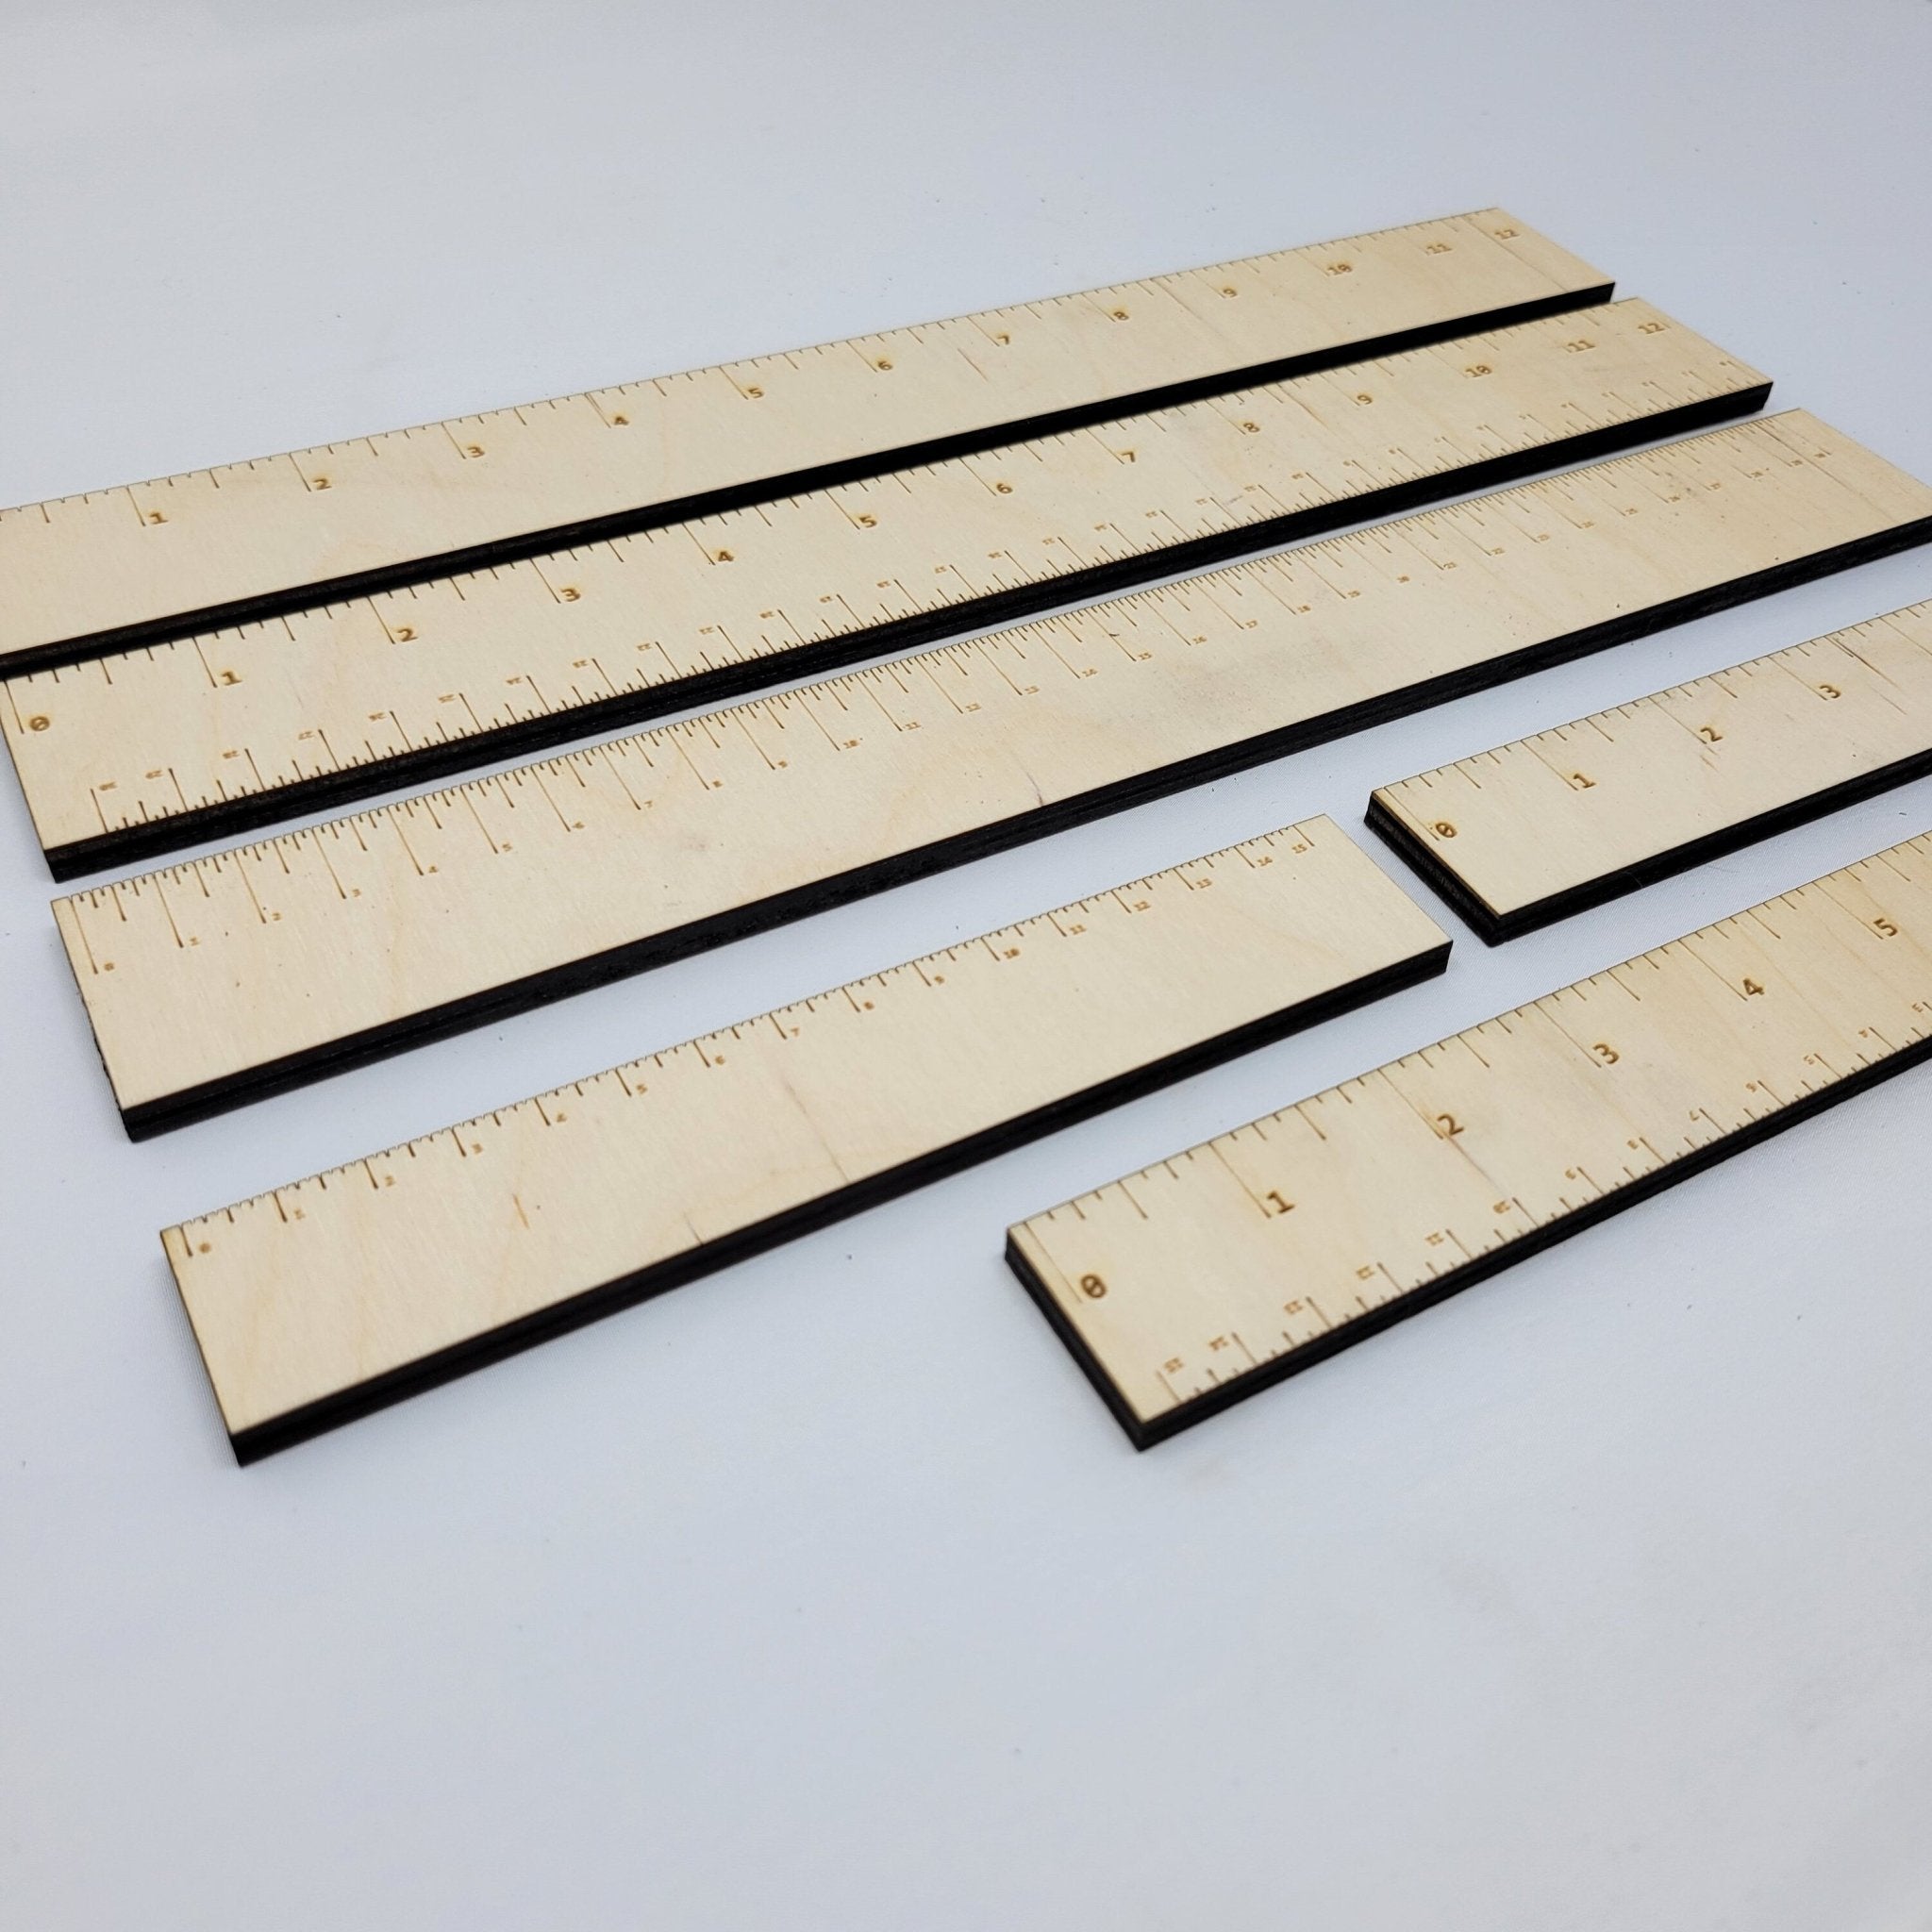 CNC Laser Metric and Inches Ruler Set - StepFIVE40 DXF Files